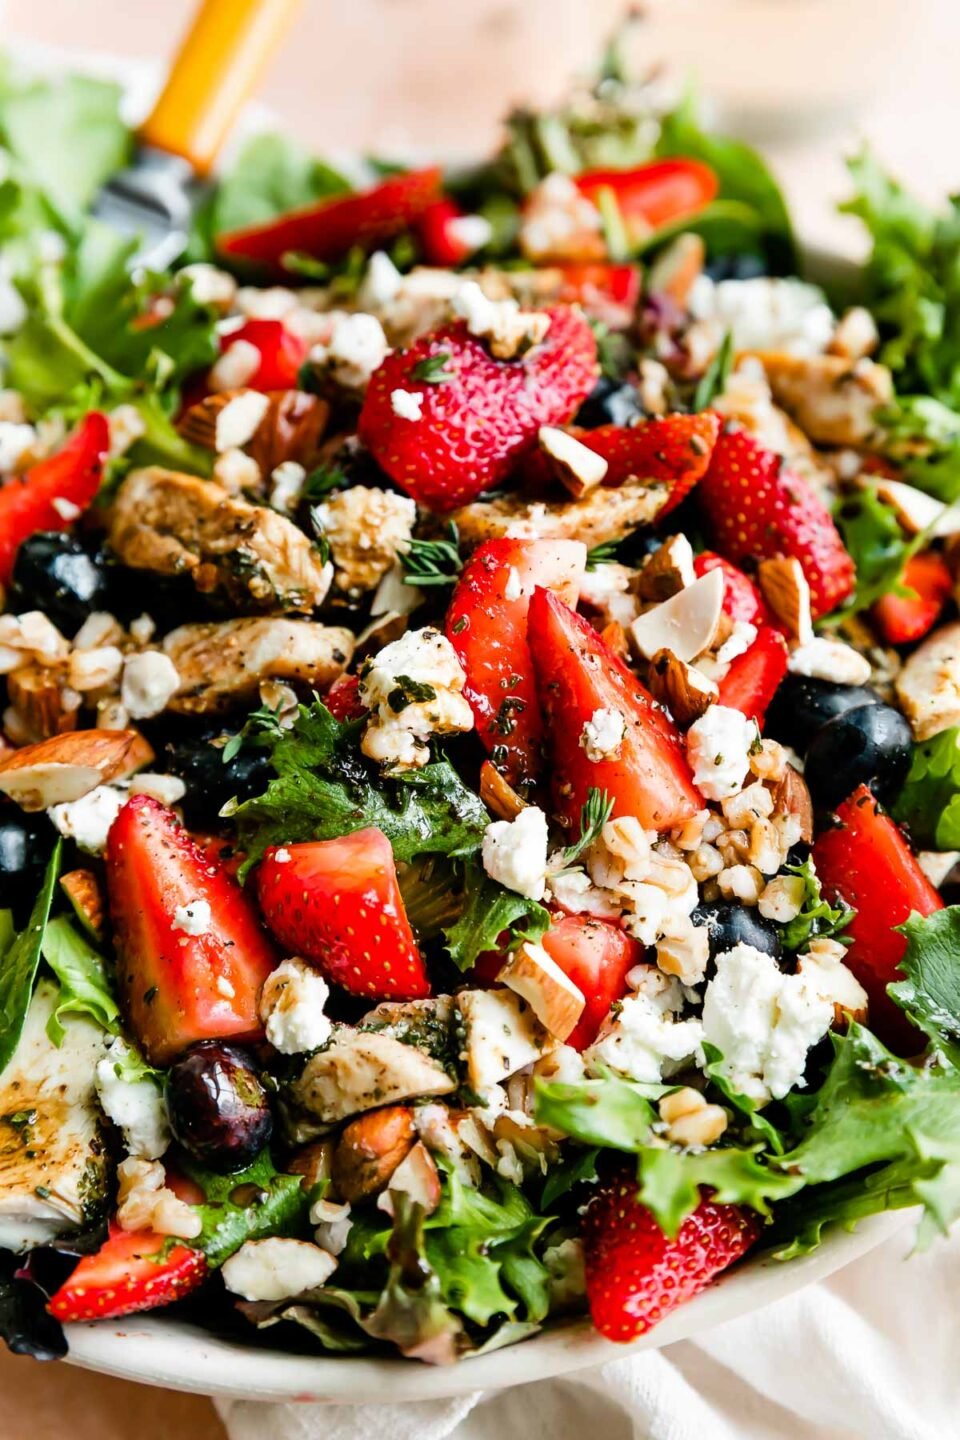 An up-close macro shot of the strawberry chicken salad: greens, strawberries, chicken, almonds, goat cheese and vinaigrette, with a wood-handled fork resting in the bowl.